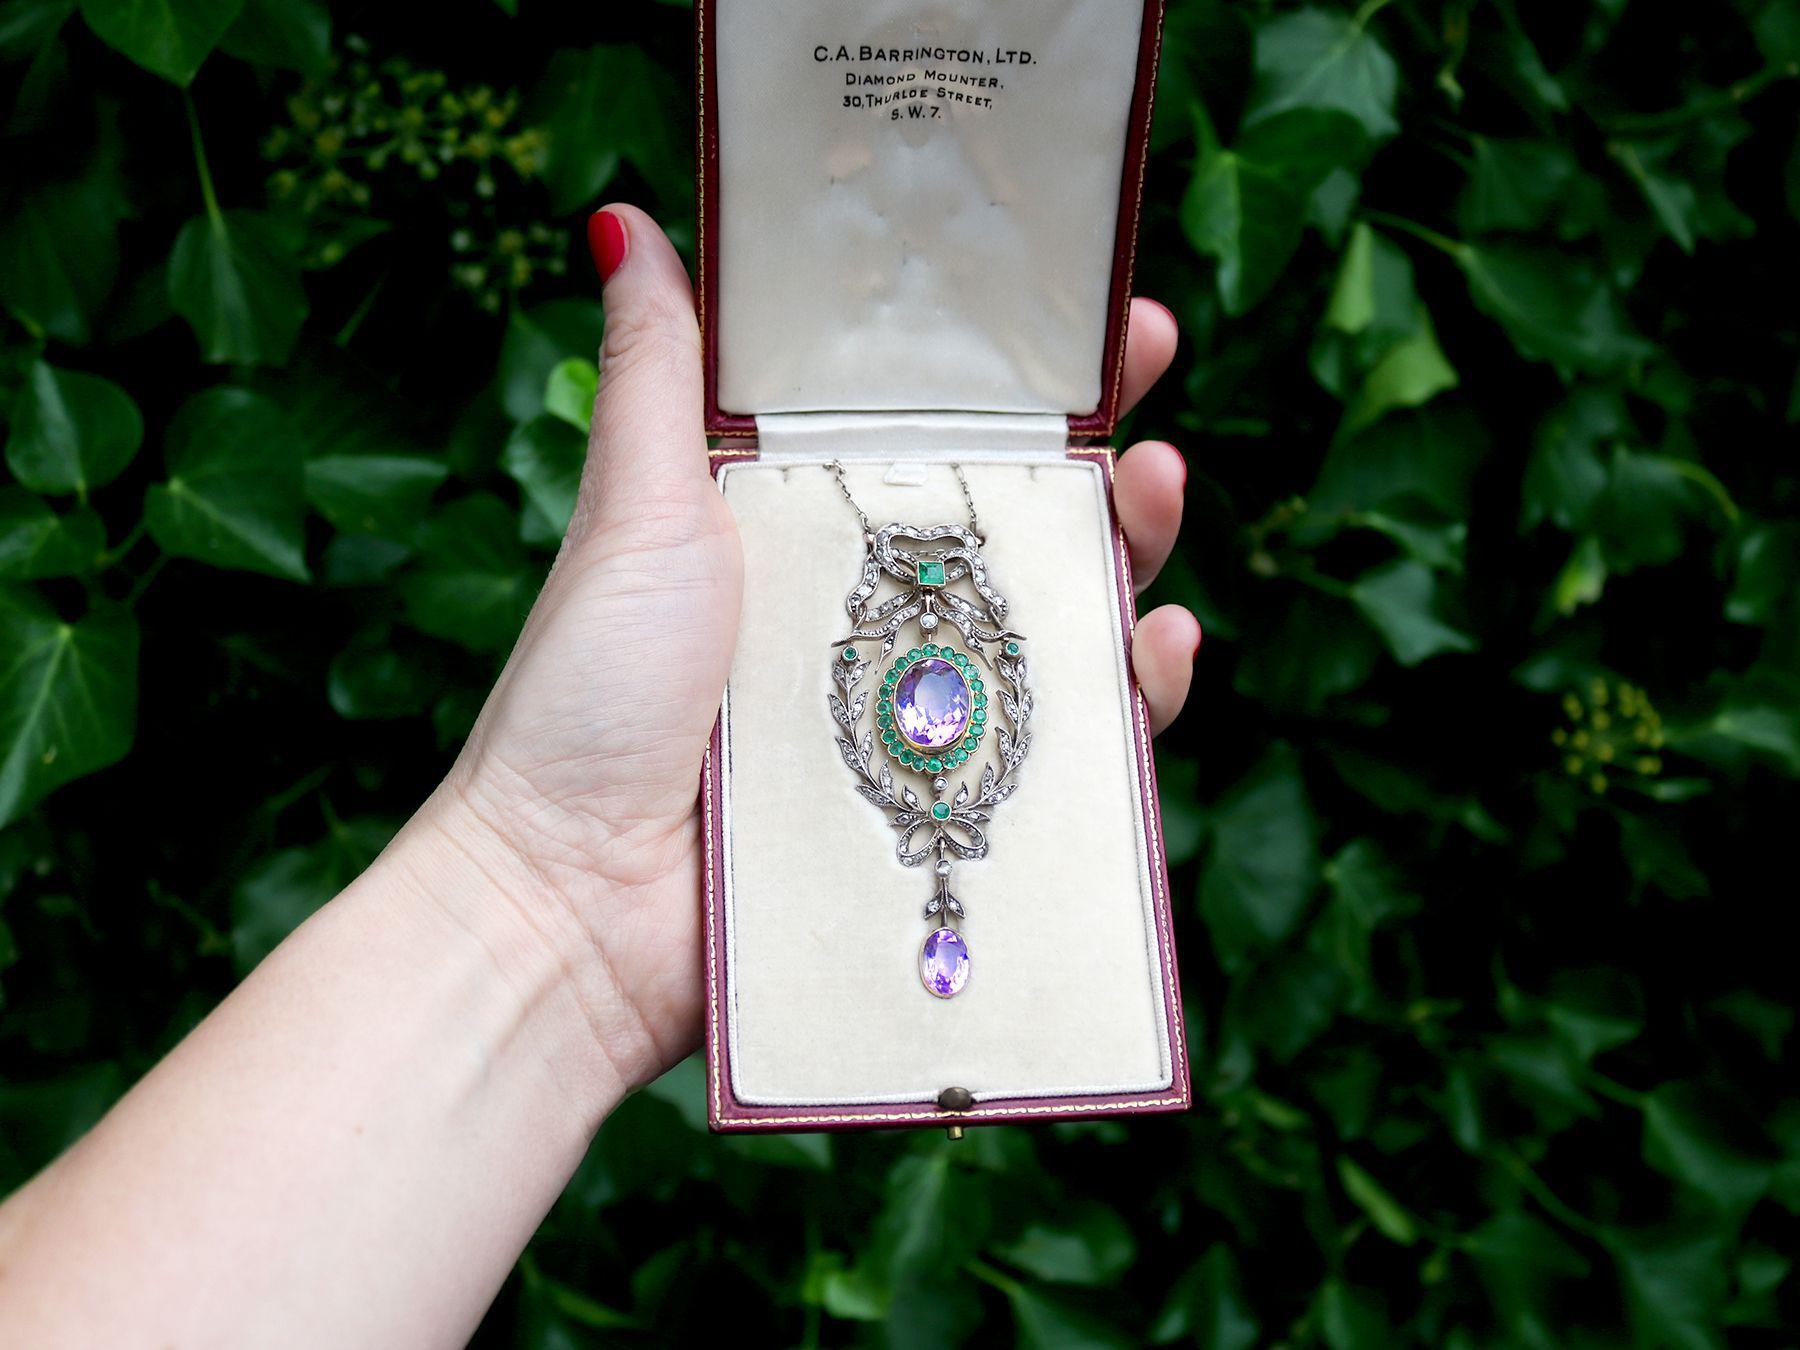 A magnificent and impressive 9.88 carat amethyst, 1.25 carat emerald and 1.13 carat diamond 'Suffragette Colors' pendant in 18 karat and 9 karat yellow gold; part of our diverse antique jewelry and estate jewelry collections.

This large and